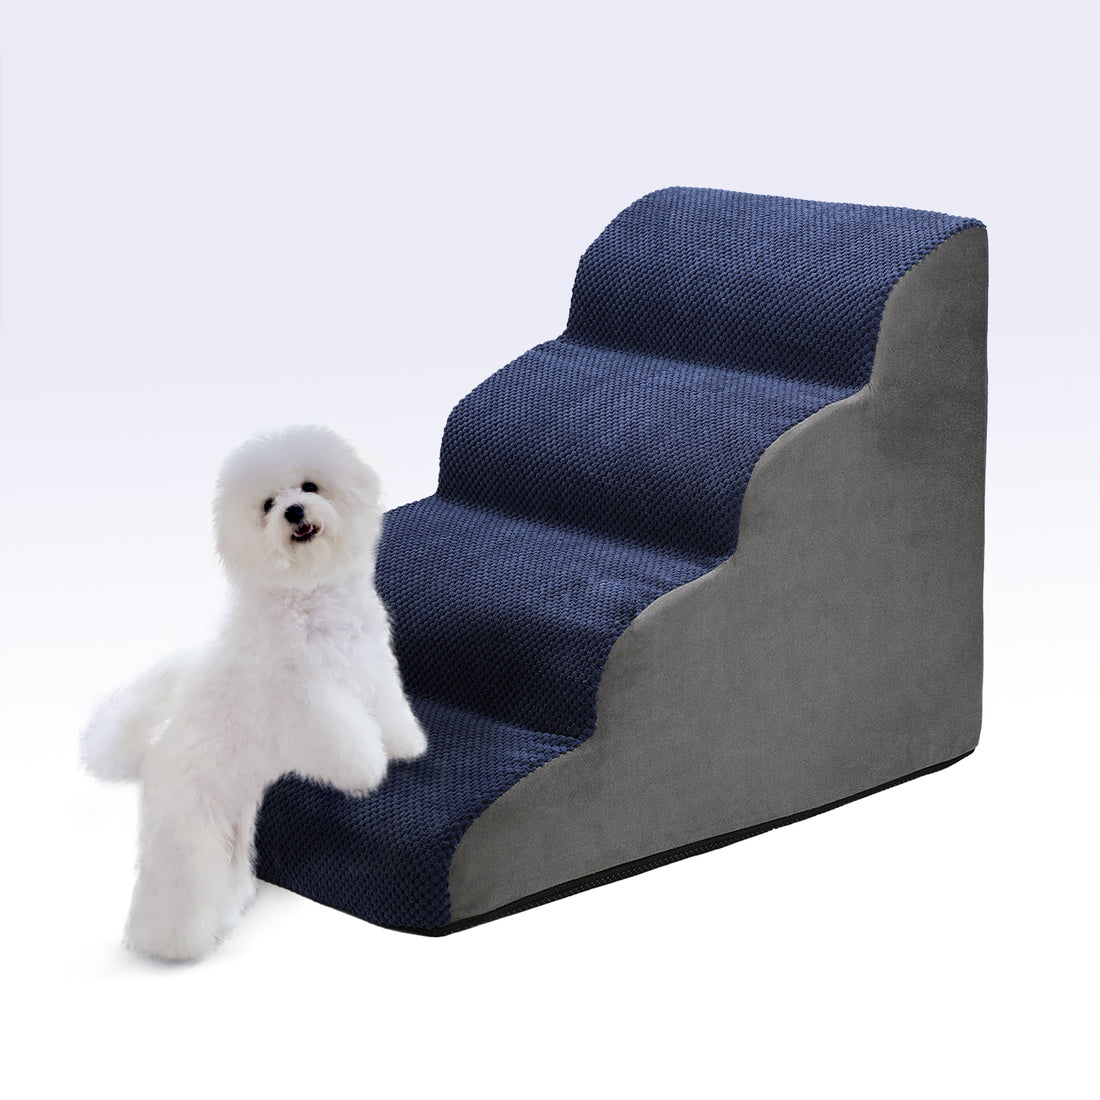 Dog Stairs for Beds Couches, High Density Foam 4-Step Dog Steps with Durable Non-Slip Fabric Cover, Dog Slope Stairs Friendly to Small Dogs and Cats or Pets